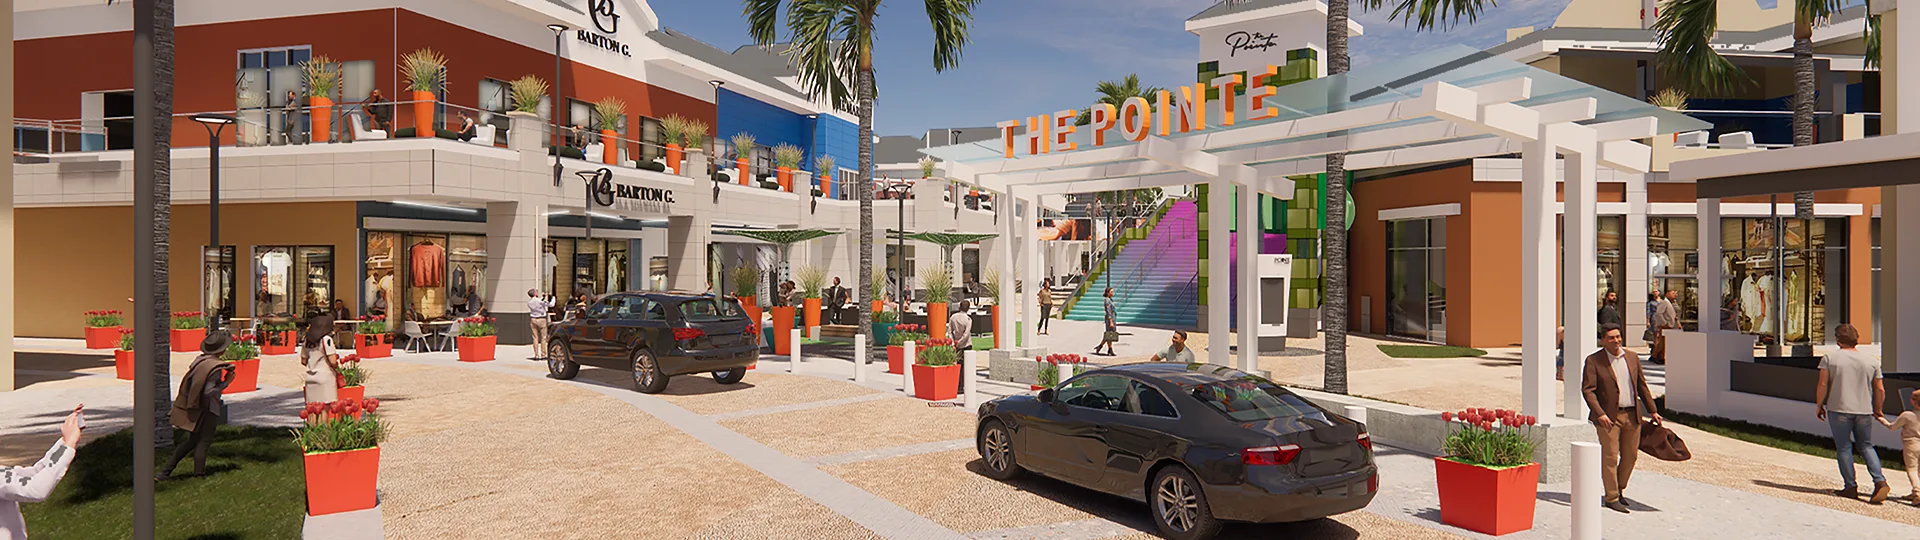 Glow-Up at Pointe Orlando: A Sneak Peek at Our Vibrant Transformation featured image